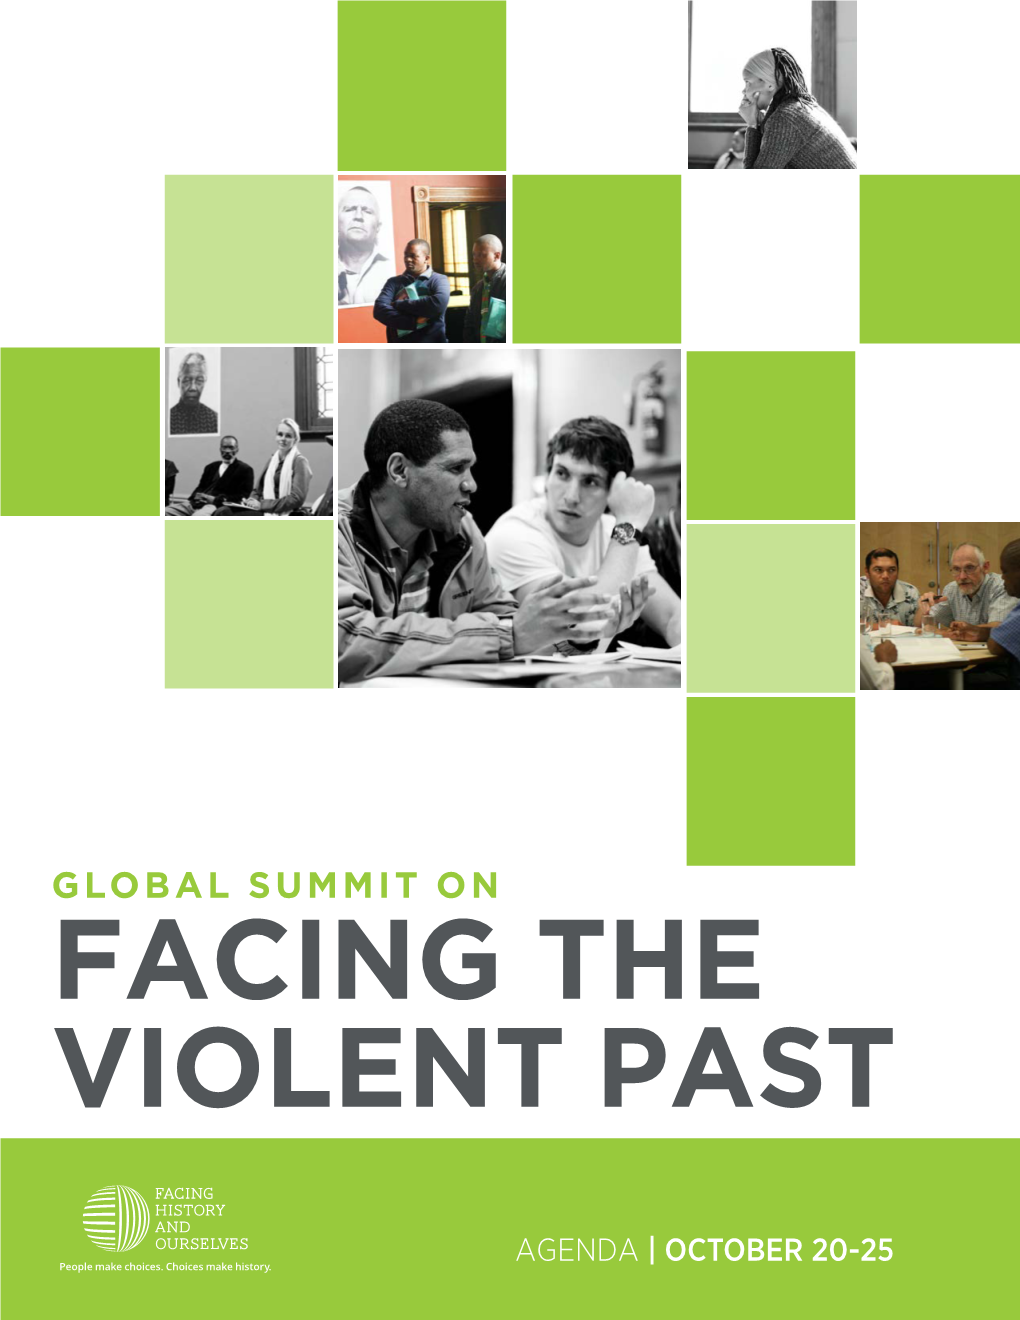 Global Summit on Facing the Violent Past